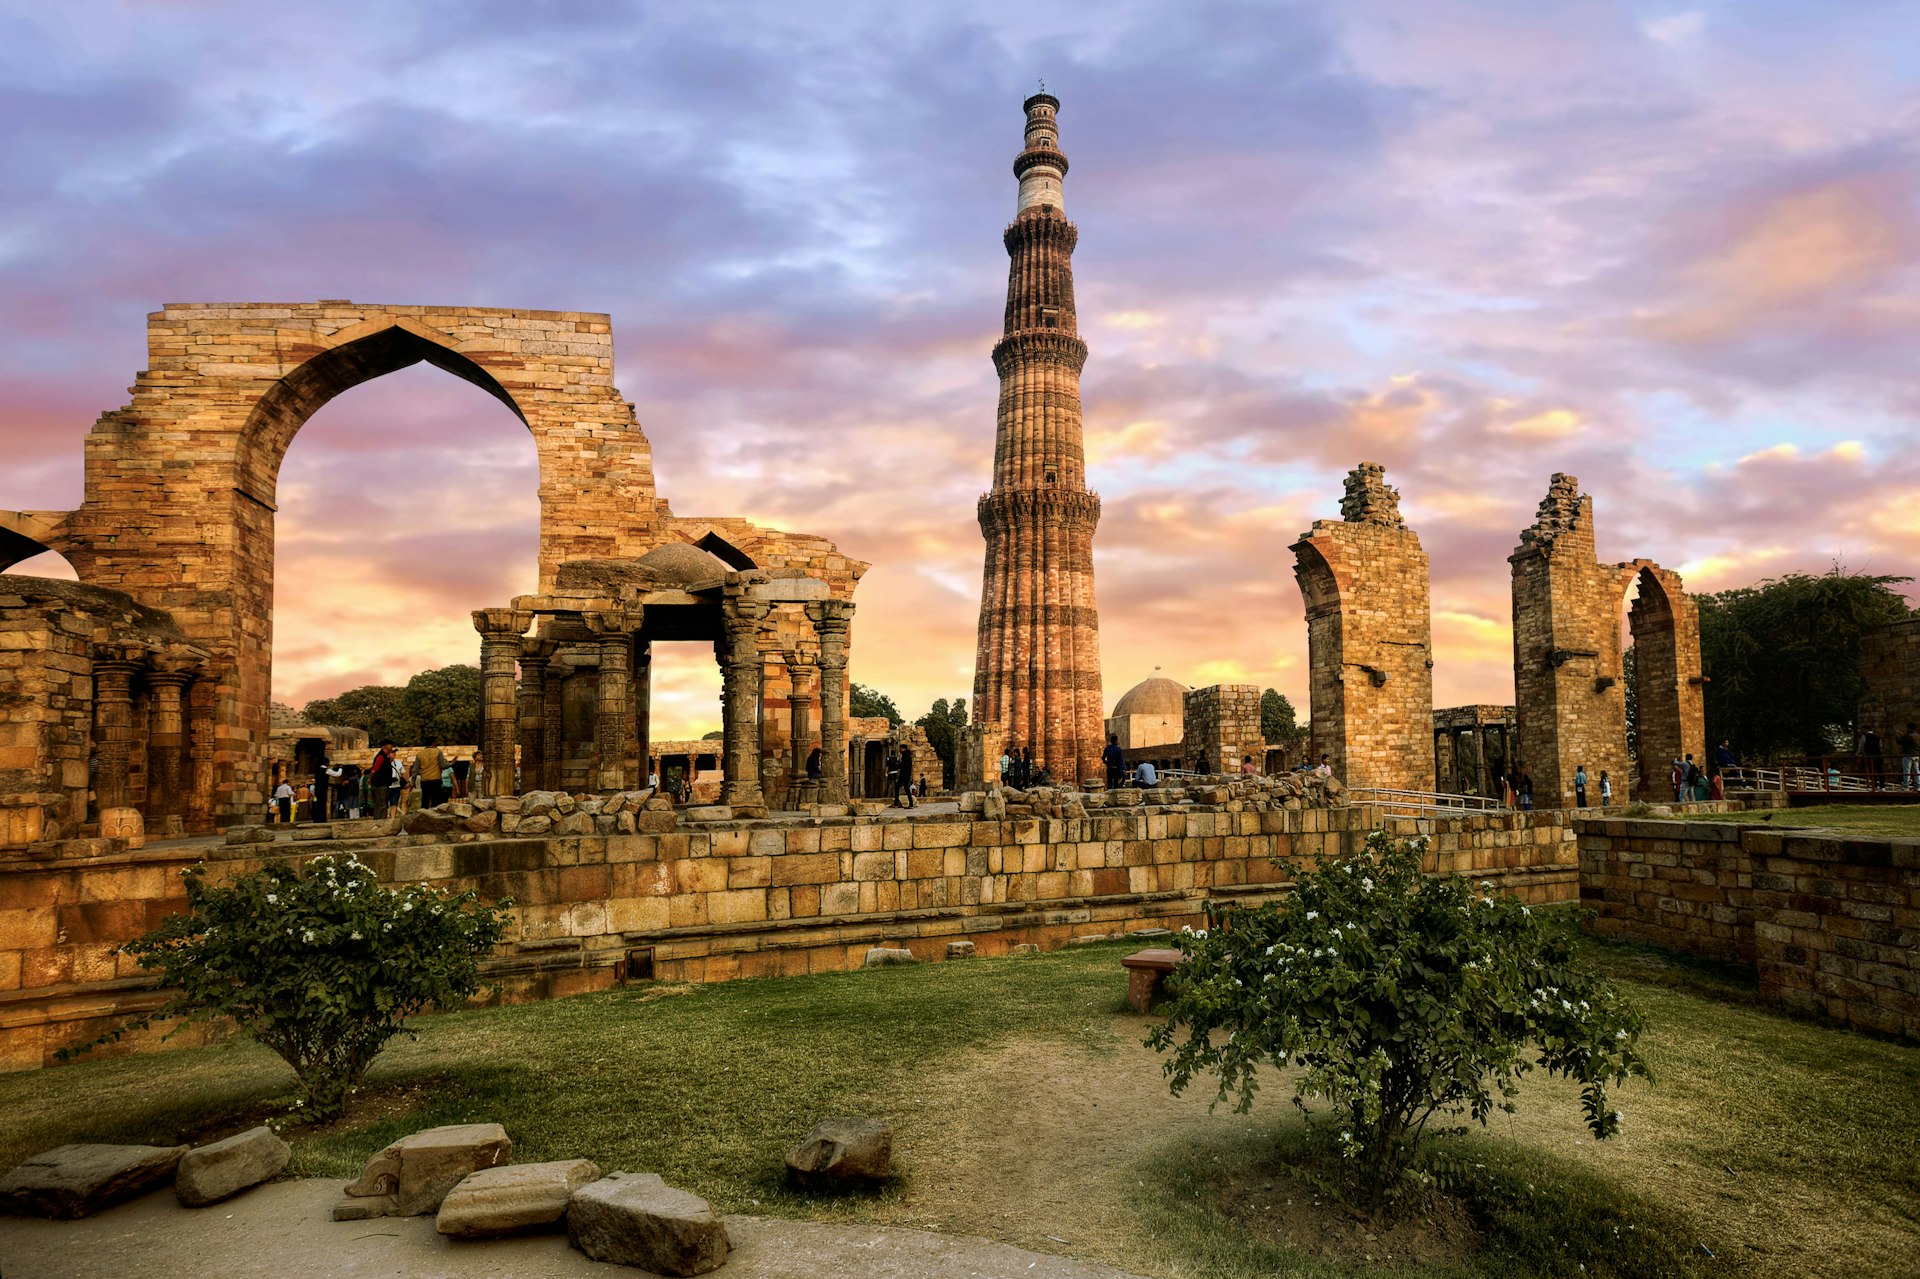 The ruins of Mehrauli, dominated by the Qutb Minar